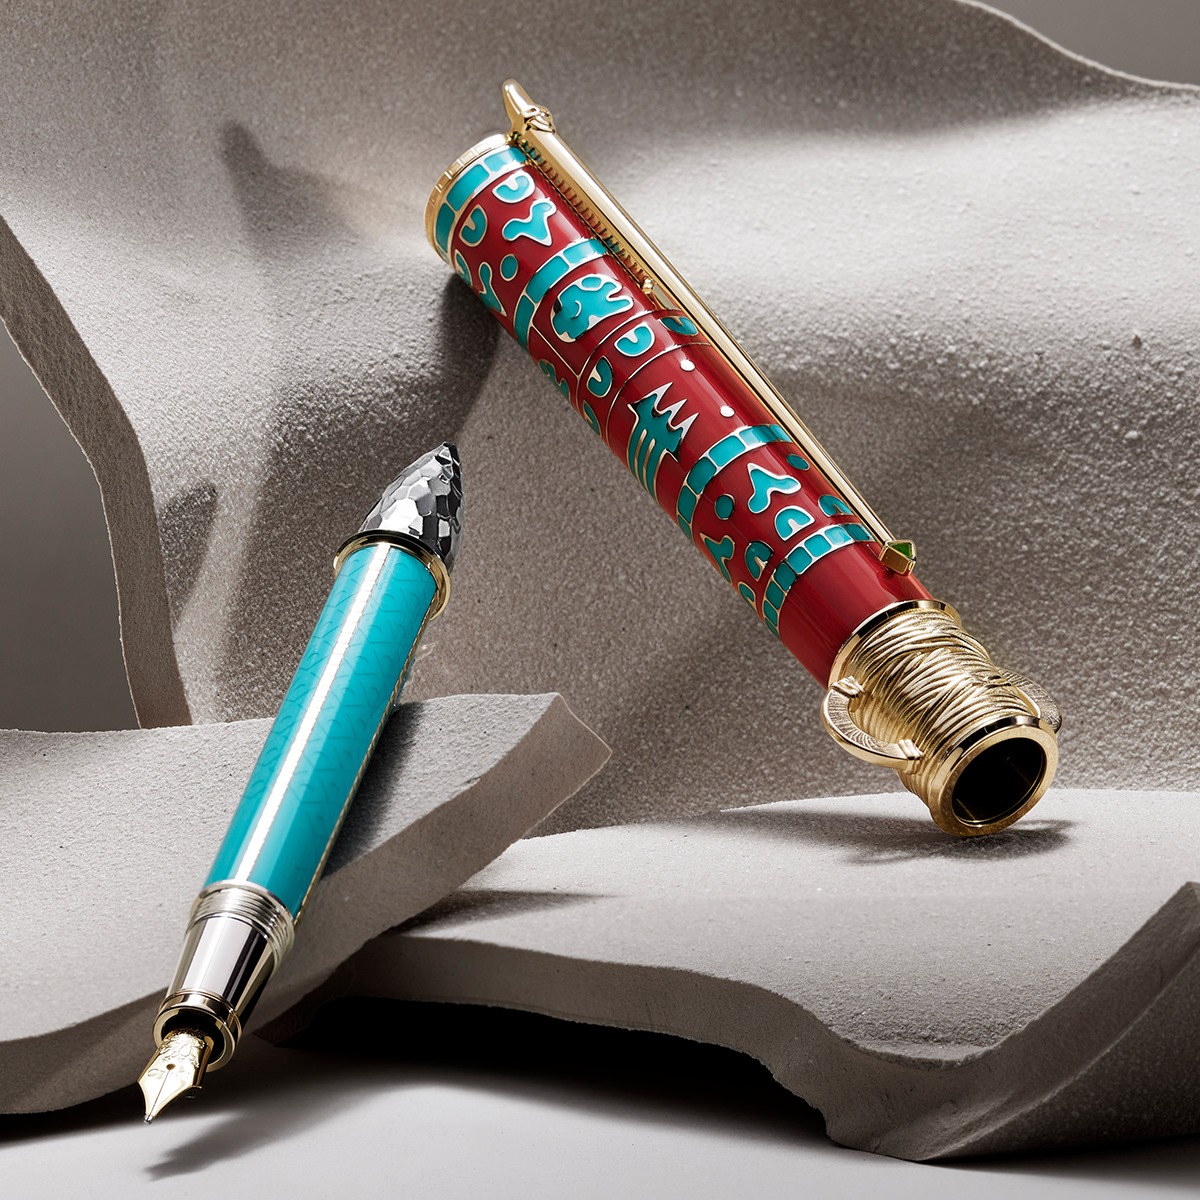 An escape into history. Set on a journey through the ancient Aztec empire with the latest Montblanc Patron of Art Limited Edition collection that honours the artistic and architectural achievements of Aztec culture and its great emperor Moctezuma Ilhuicamina (c. 1398-1469).